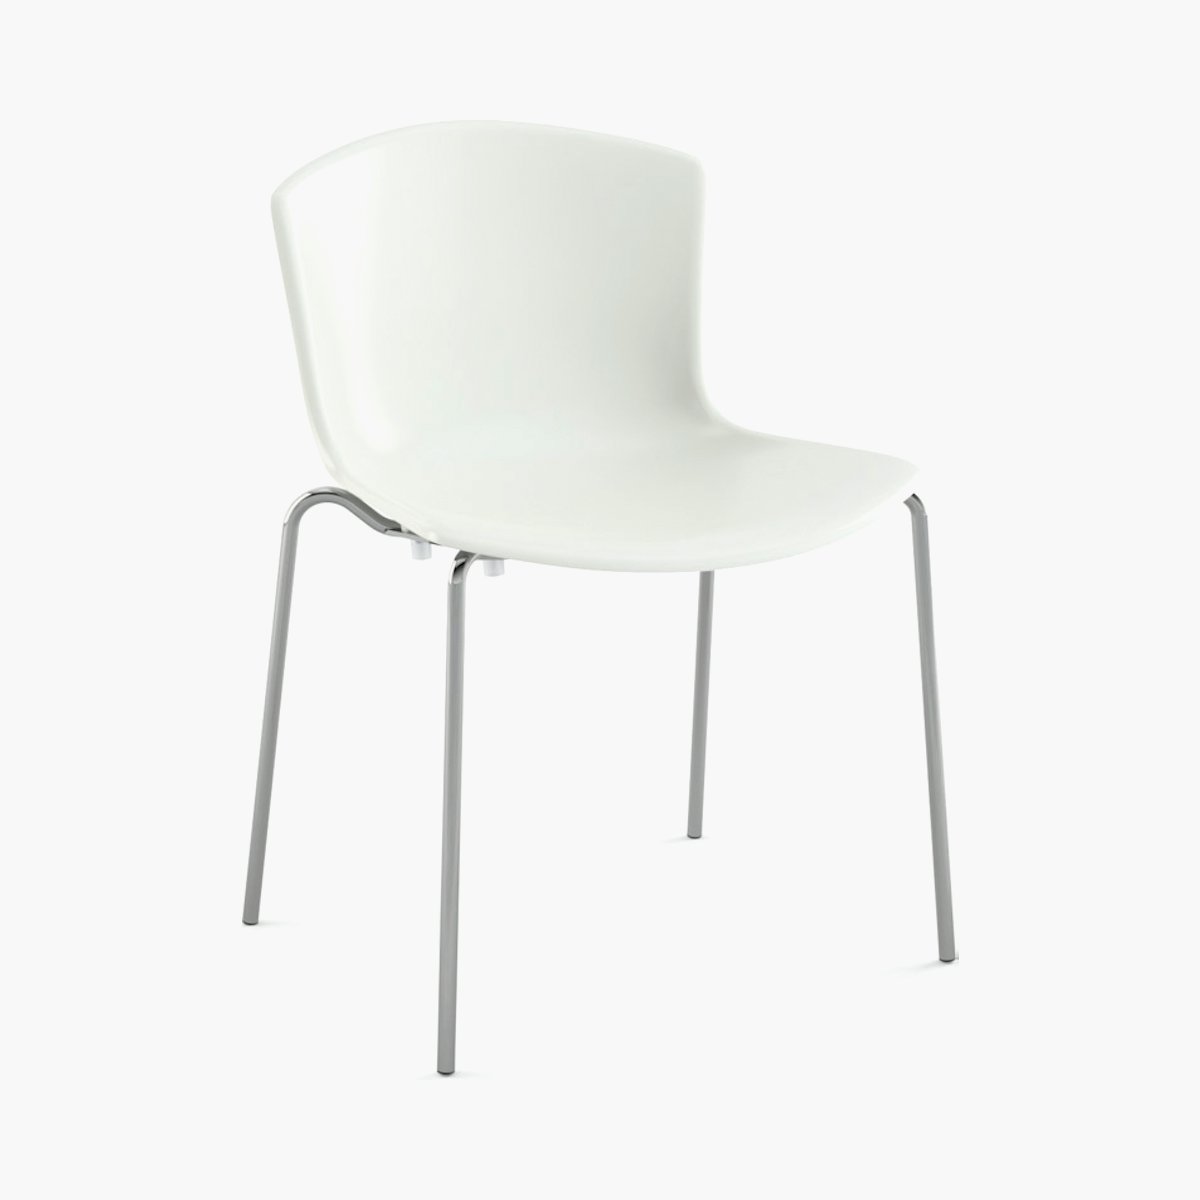 Bertoia Stacking Molded Shell Chair